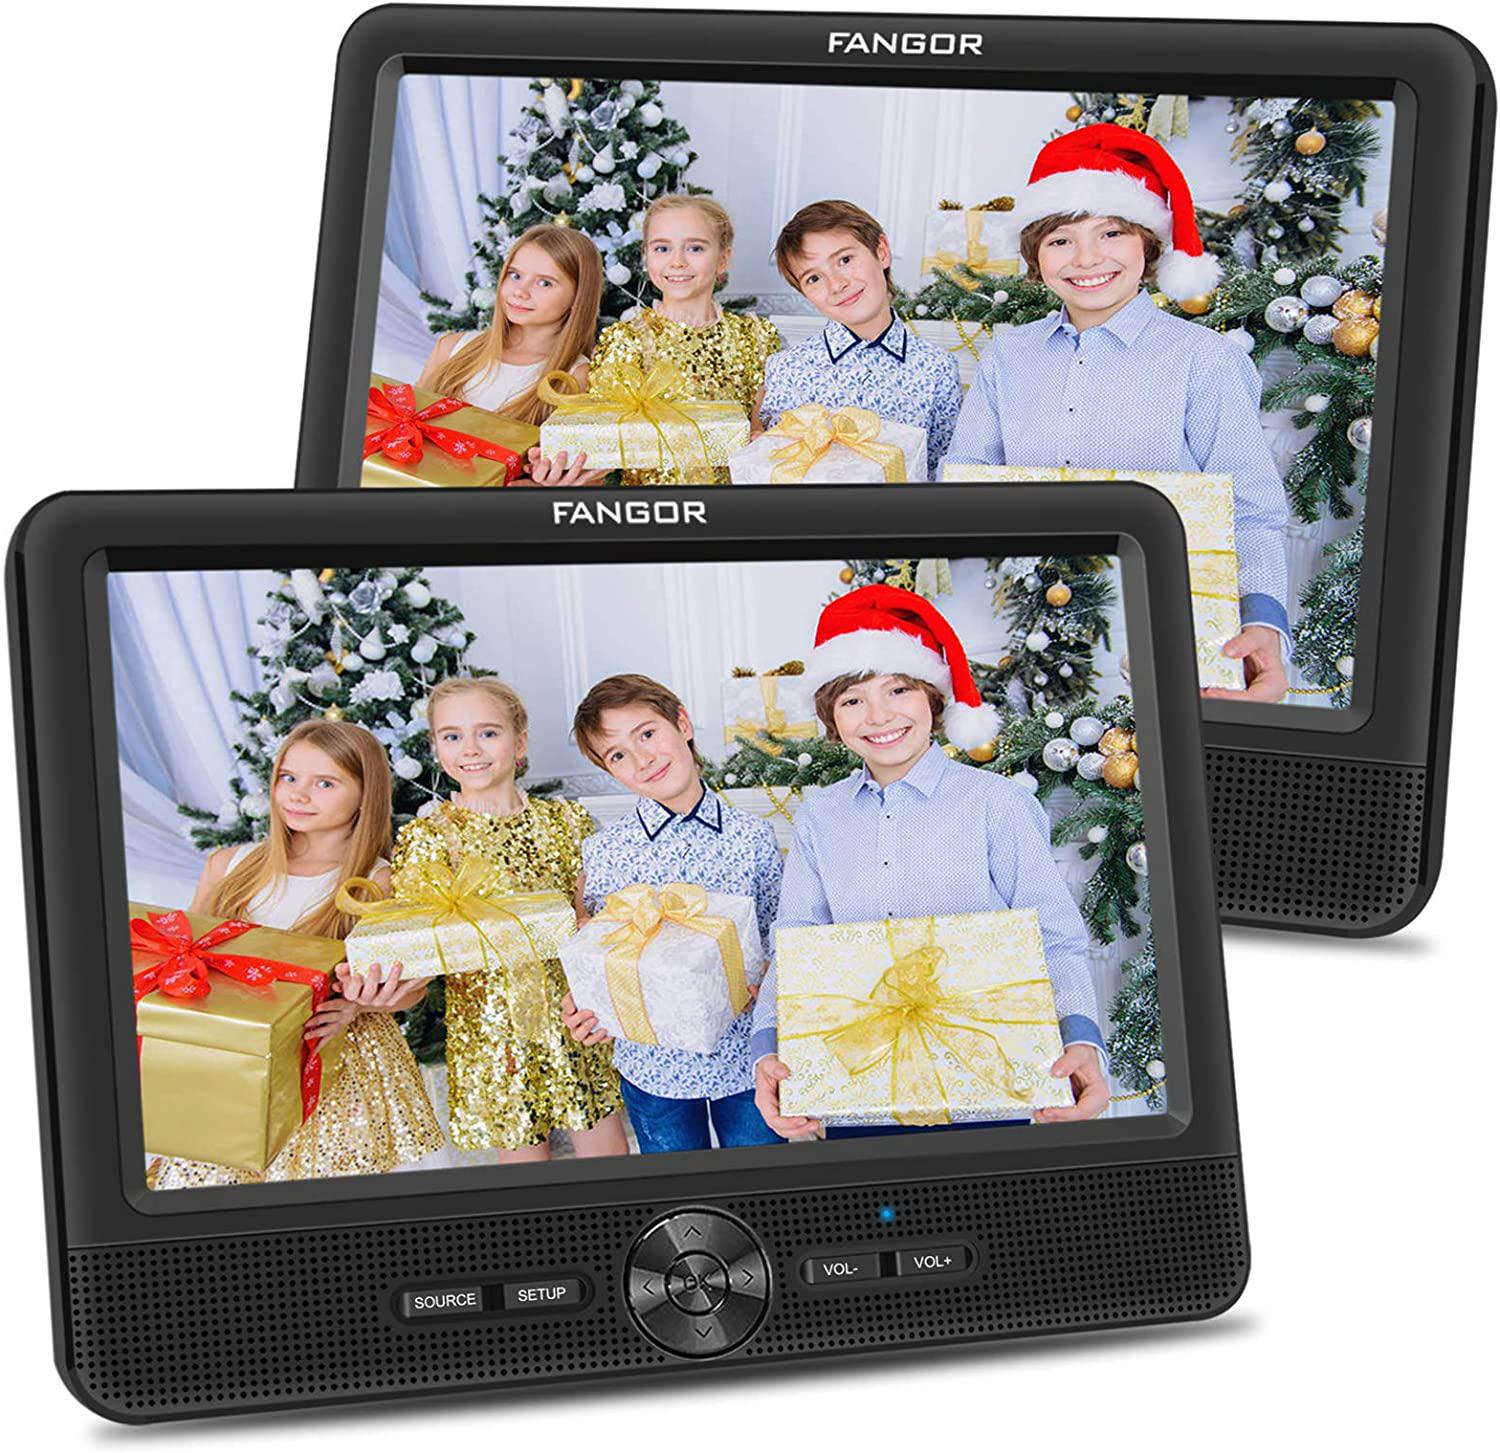 FANGOR, FANGOR 10.1'' Car DVD Player Dual Screen, Headrest Video Player with 5 Hour Rechargeable Battery, Twin Screen for Kids Support USB&SD Slot